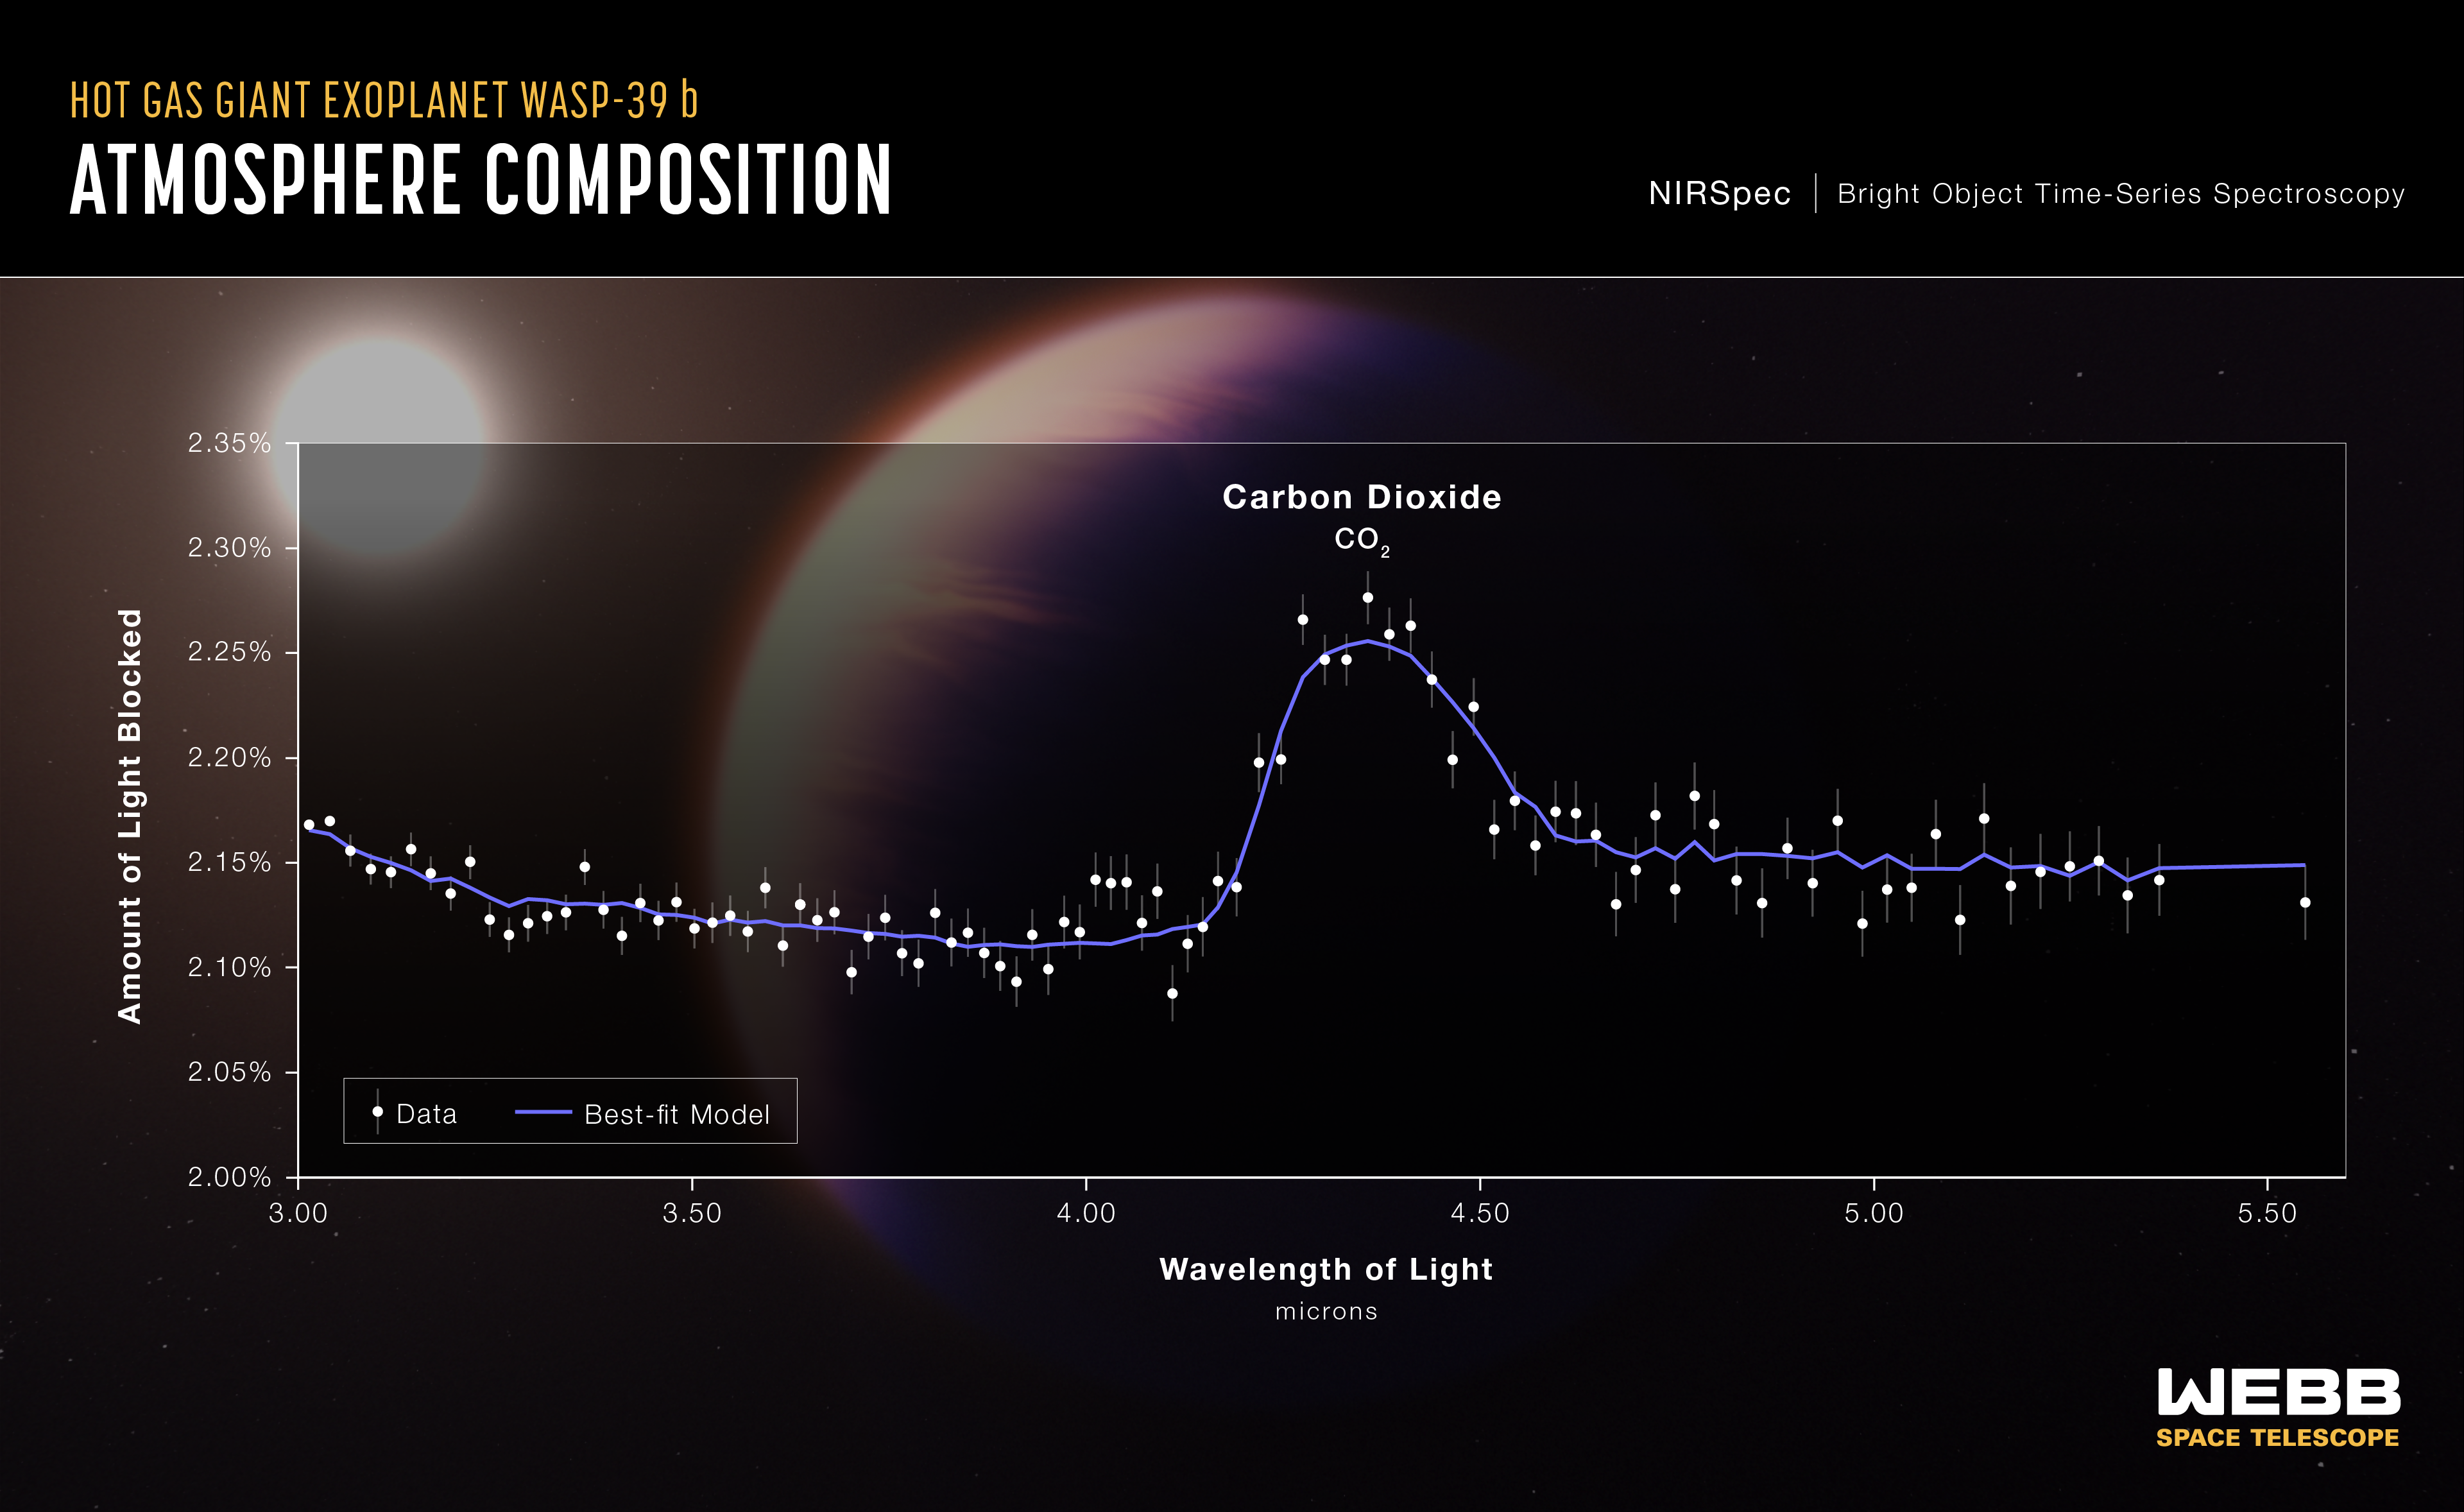 The spectrum of light passing through the atmosphere of the exoplanet Wasp 39b taken by the James Webb Space Telescope has shown a clear sign of an abundance of carbon dioxide, the first time the gas has been clearly detected in an exoplanet atmosphere.